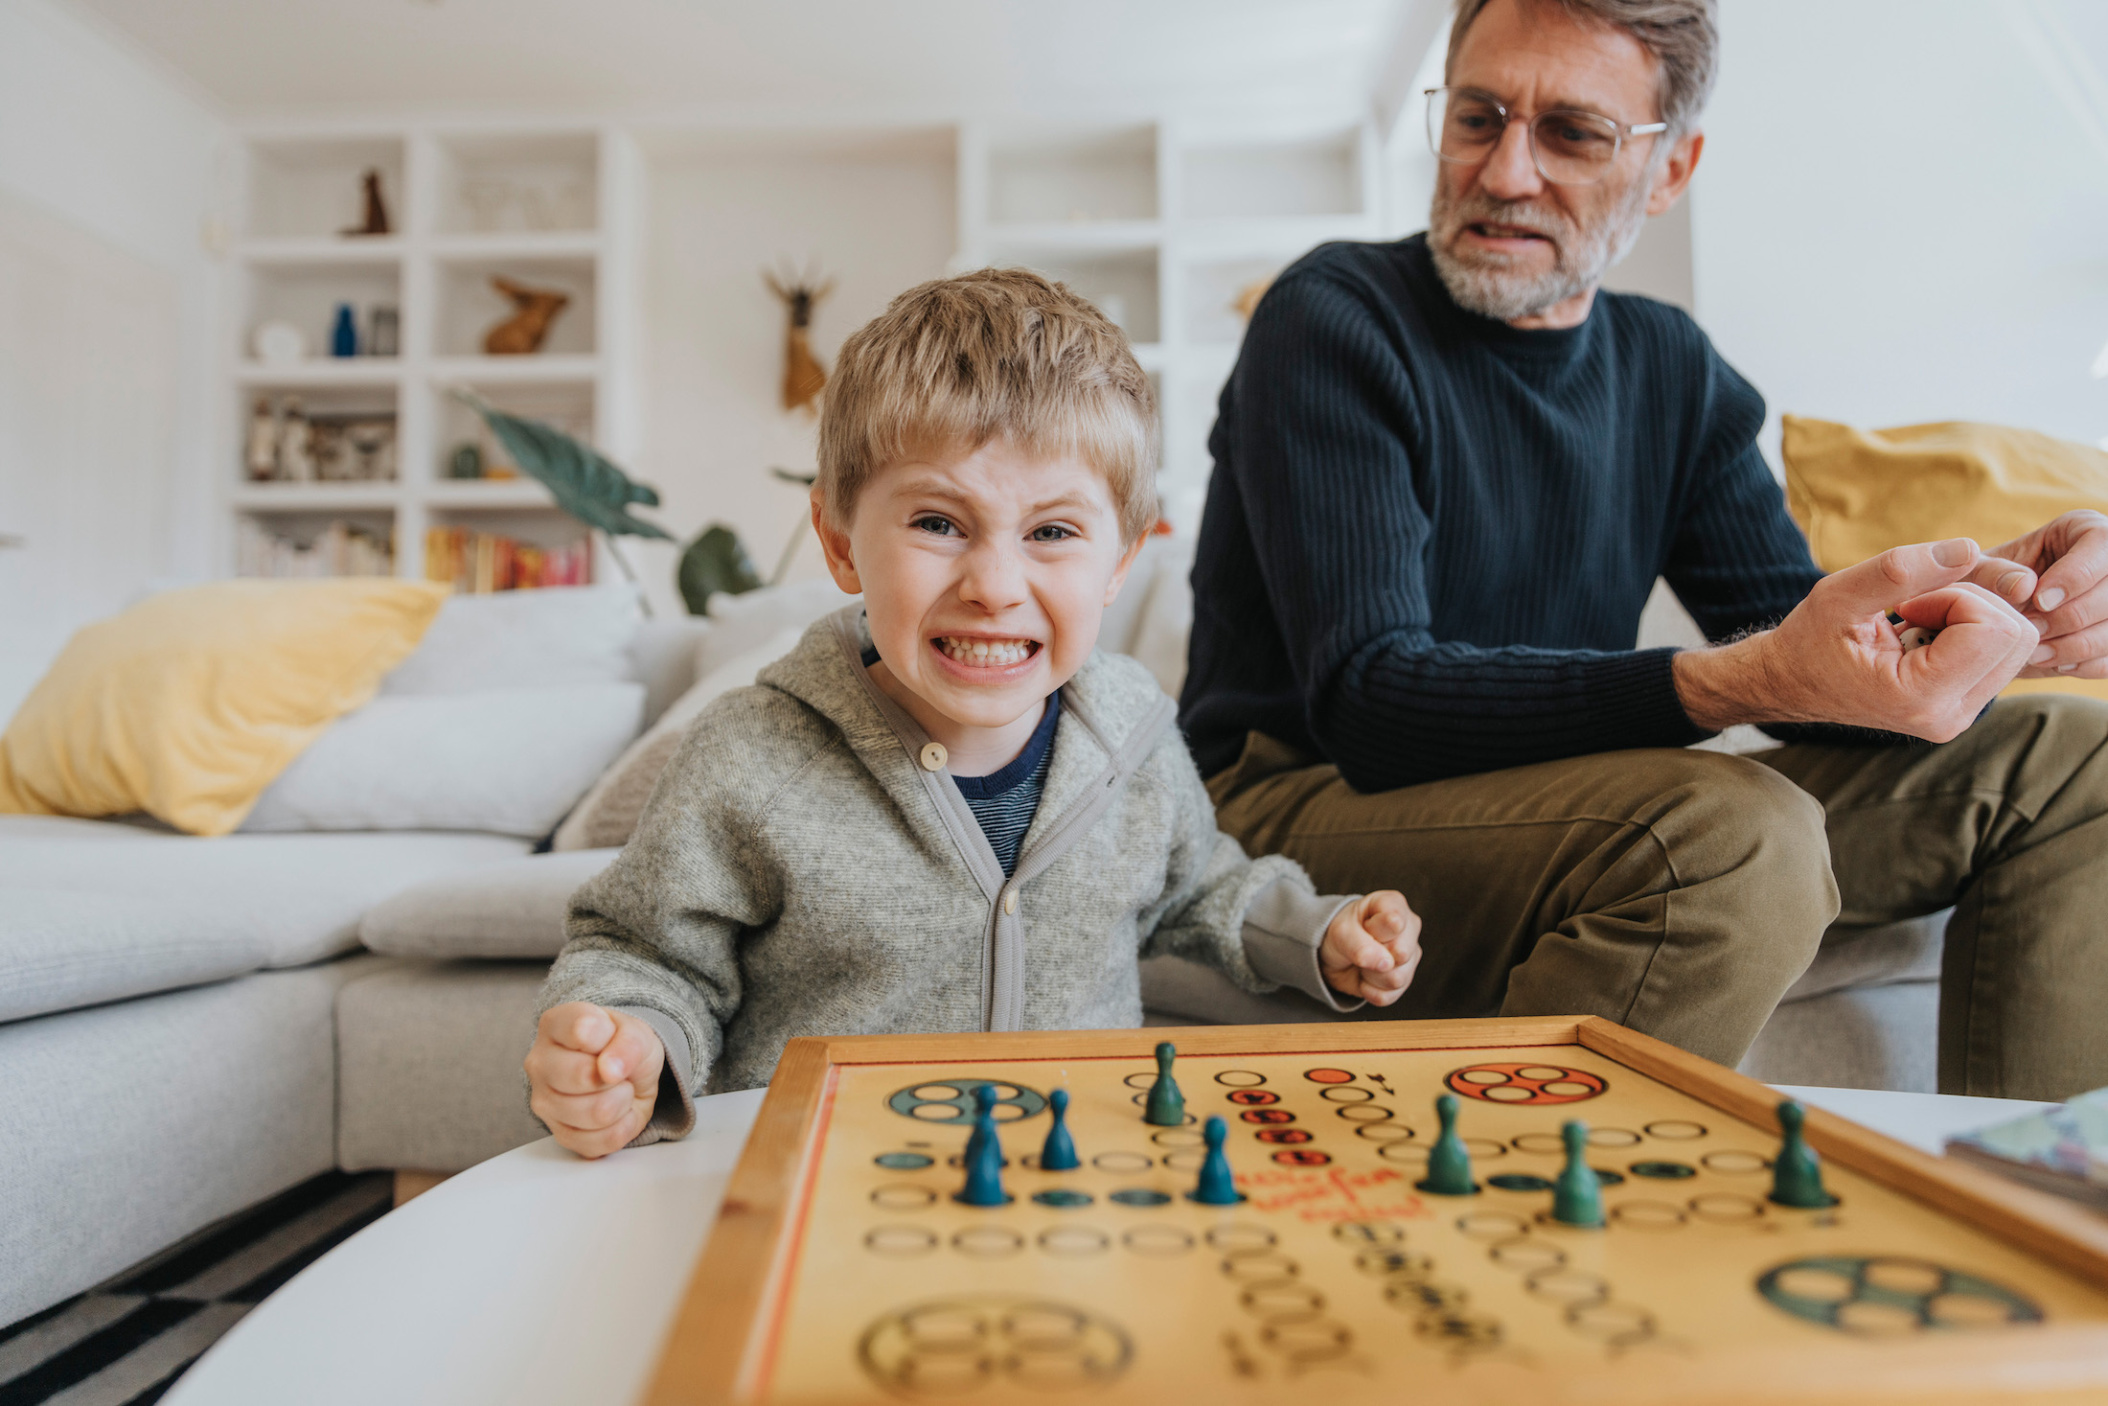 Son winning against his father while playing a board game at home, Viersen, NRW, Germany